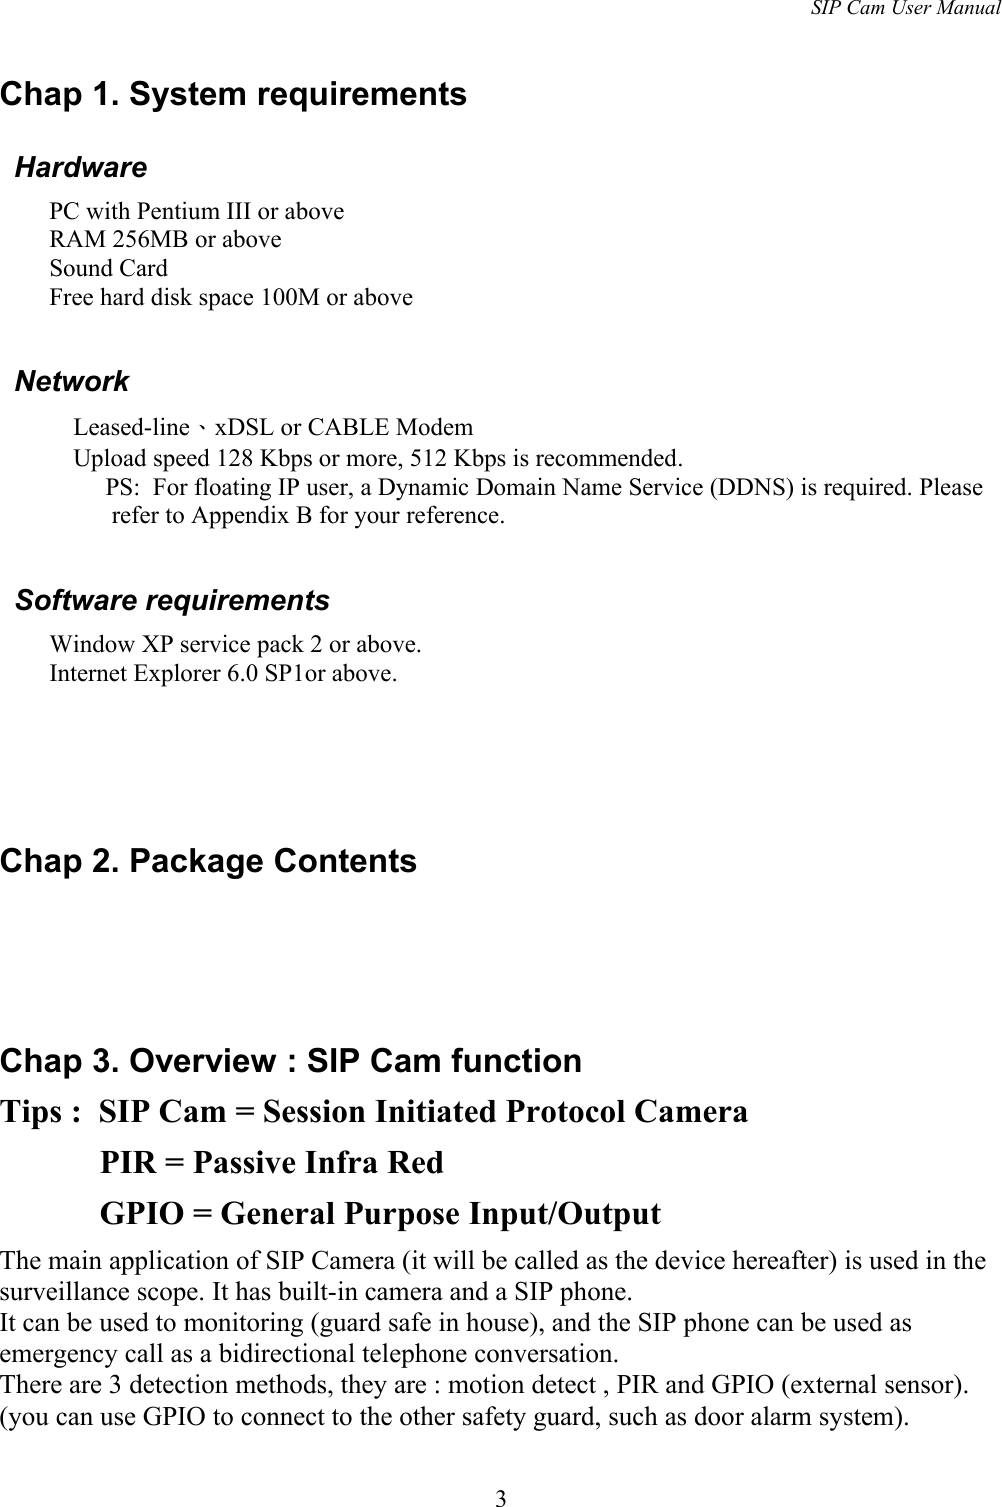 SIP Cam User ManualChap 1. System requirements HardwarePC with Pentium III or above RAM 256MB or aboveSound CardFree hard disk space 100M or above NetworkLeased-line、xDSL or CABLE Modem  Upload speed 128 Kbps or more, 512 Kbps is recommended.    PS:  For floating IP user, a Dynamic Domain Name Service (DDNS) is required. Please refer to Appendix B for your reference. Software requirementsWindow XP service pack 2 or above.Internet Explorer 6.0 SP1or above.Chap 2. Package ContentsChap 3. Overview : SIP Cam functionTips :  SIP Cam = Session Initiated Protocol Camera      PIR = Passive Infra Red      GPIO = General Purpose Input/Output    The main application of SIP Camera (it will be called as the device hereafter) is used in the surveillance scope. It has built-in camera and a SIP phone. It can be used to monitoring (guard safe in house), and the SIP phone can be used as emergency call as a bidirectional telephone conversation. There are 3 detection methods, they are : motion detect , PIR and GPIO (external sensor). (you can use GPIO to connect to the other safety guard, such as door alarm system).3